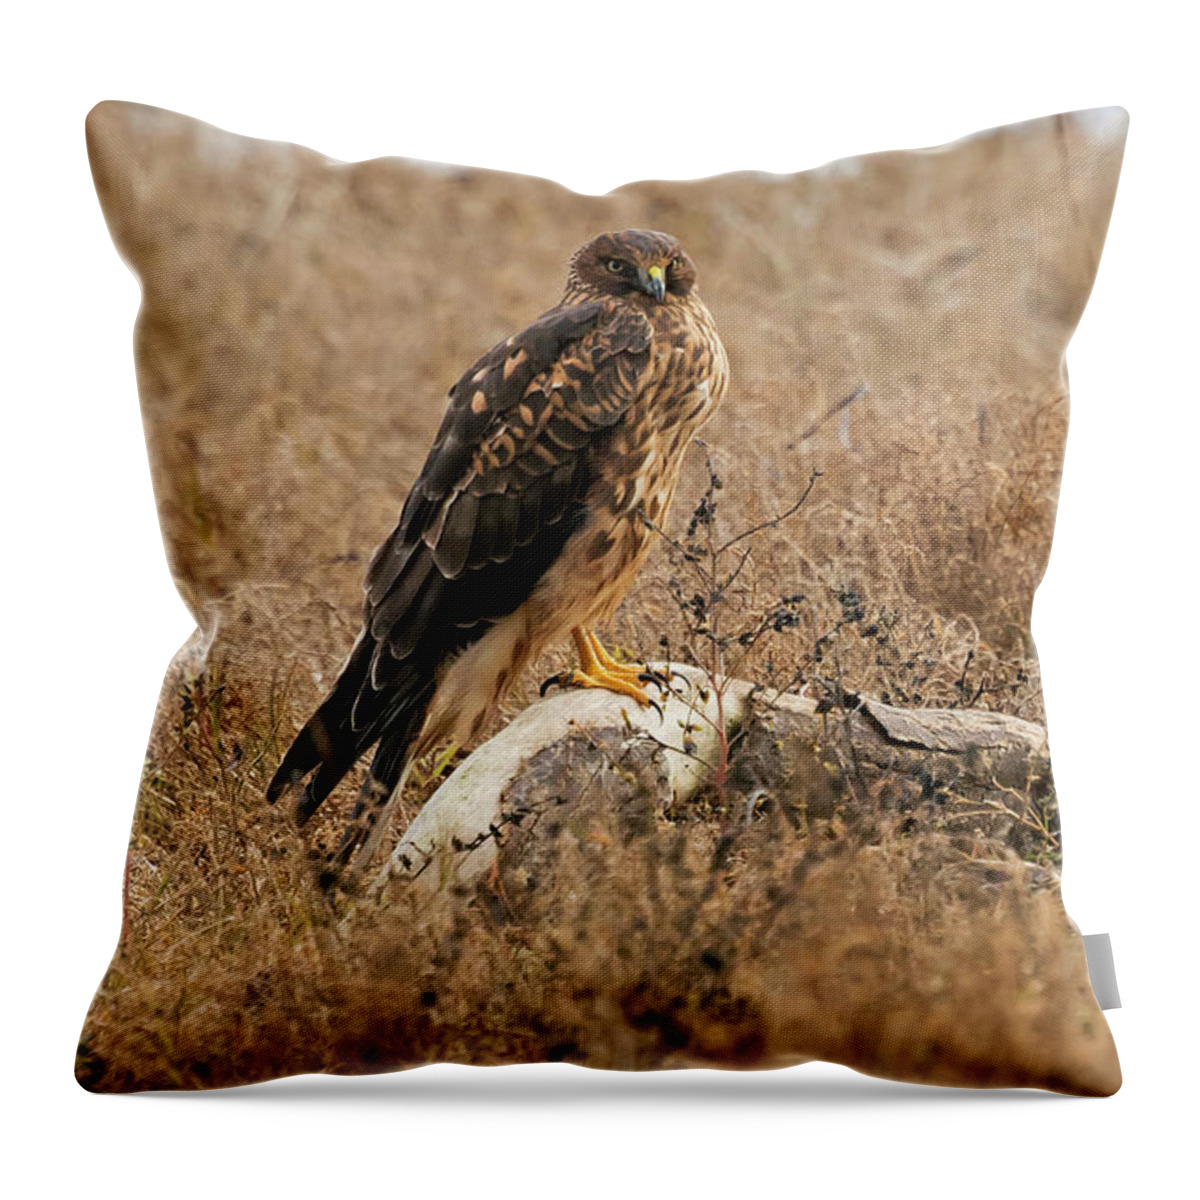 Harrier Throw Pillow featuring the photograph Harrier by Terry Dadswell